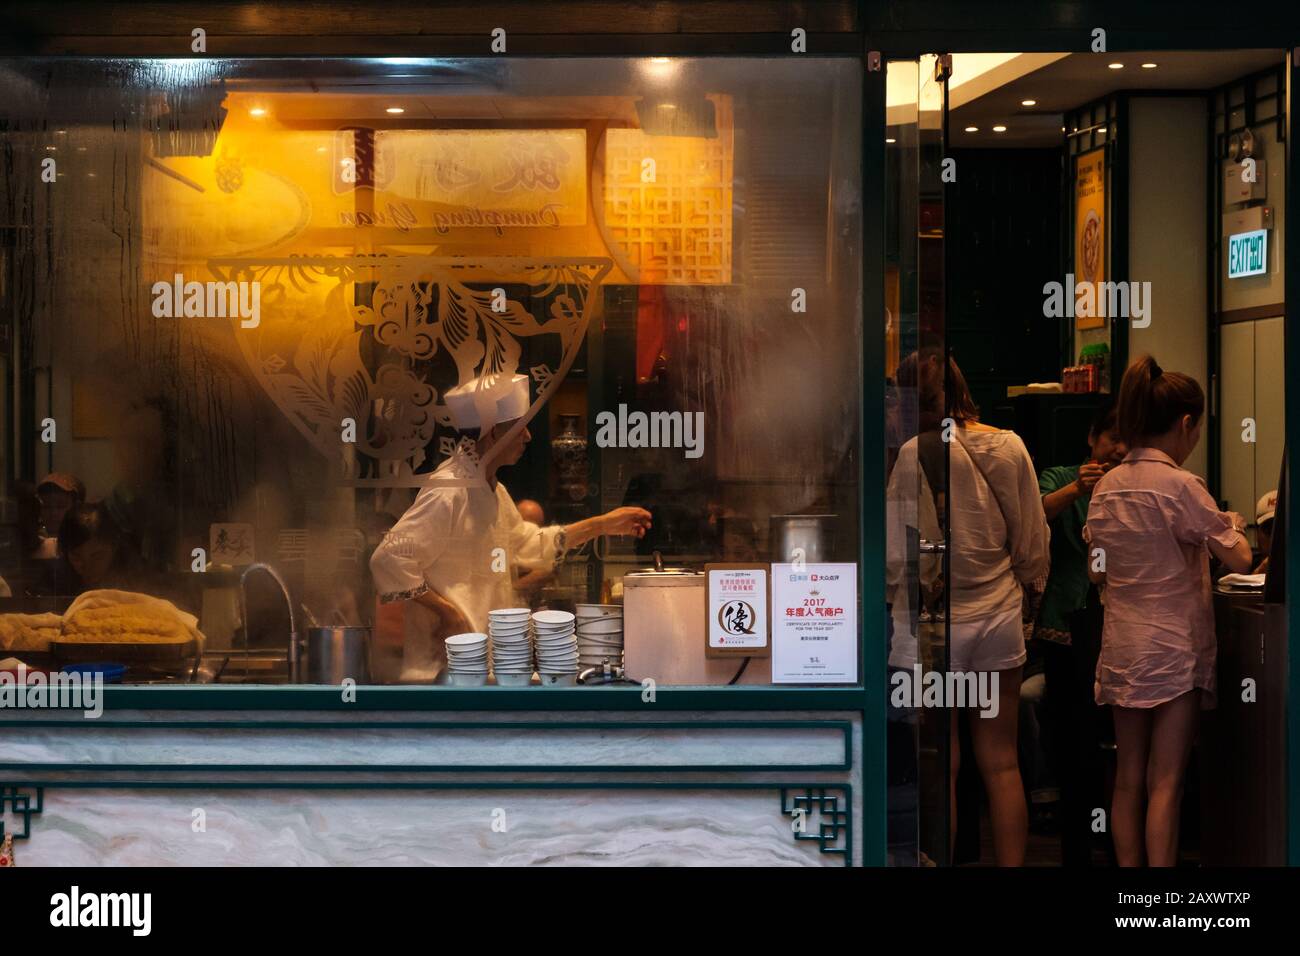 Hong Kong - November, 2019:  Window of Chinese restaurant showing chef cooking food and people eating Stock Photo